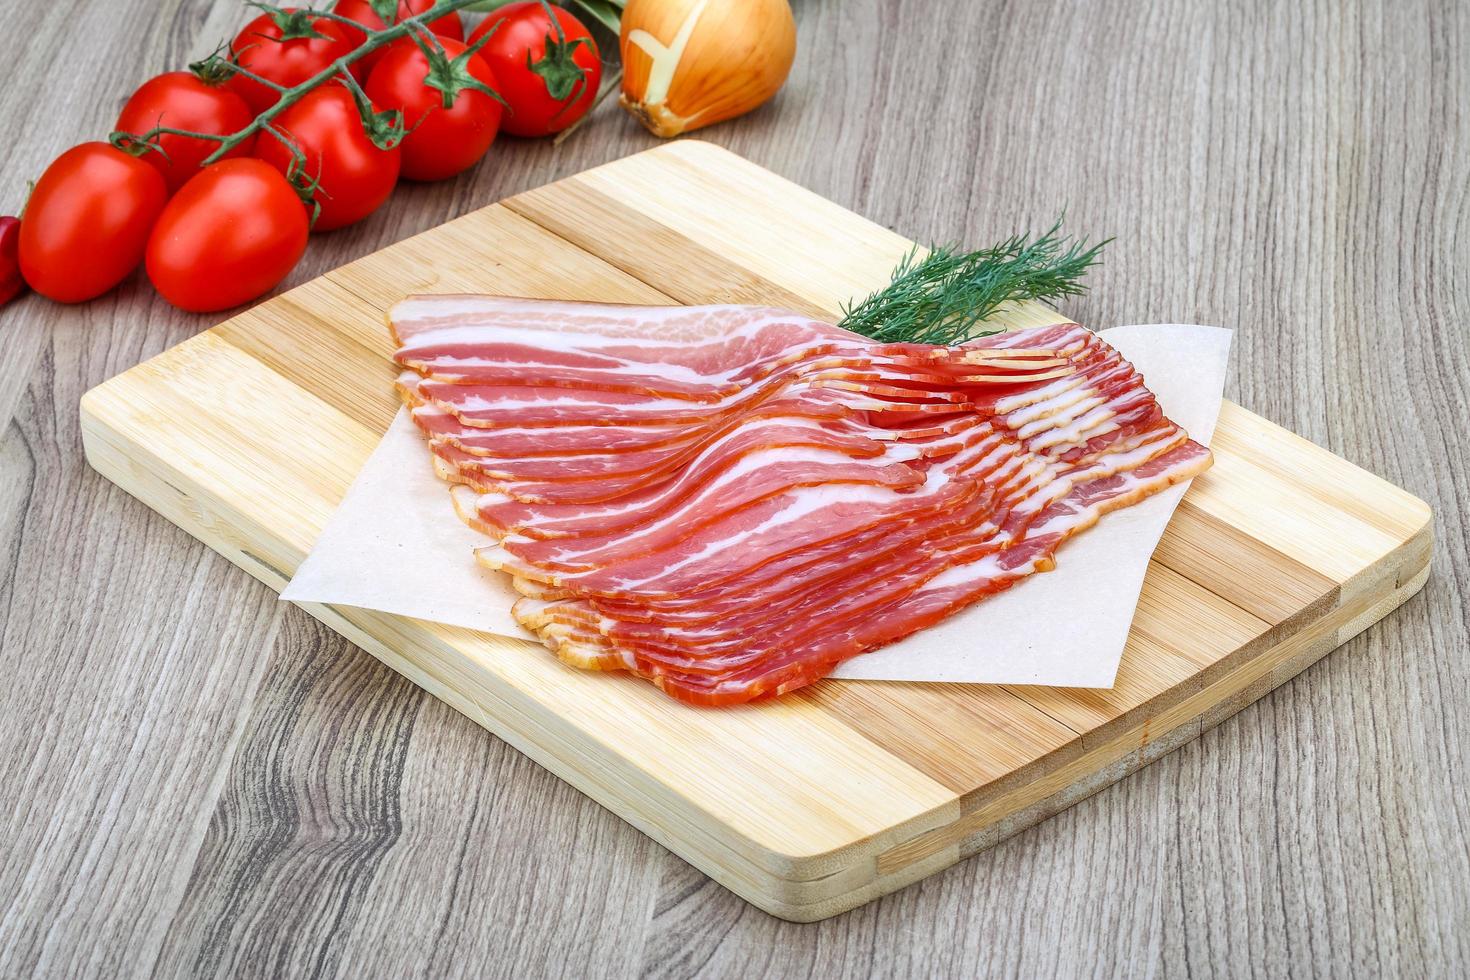 Sliced bacon on wooden board and wooden background photo